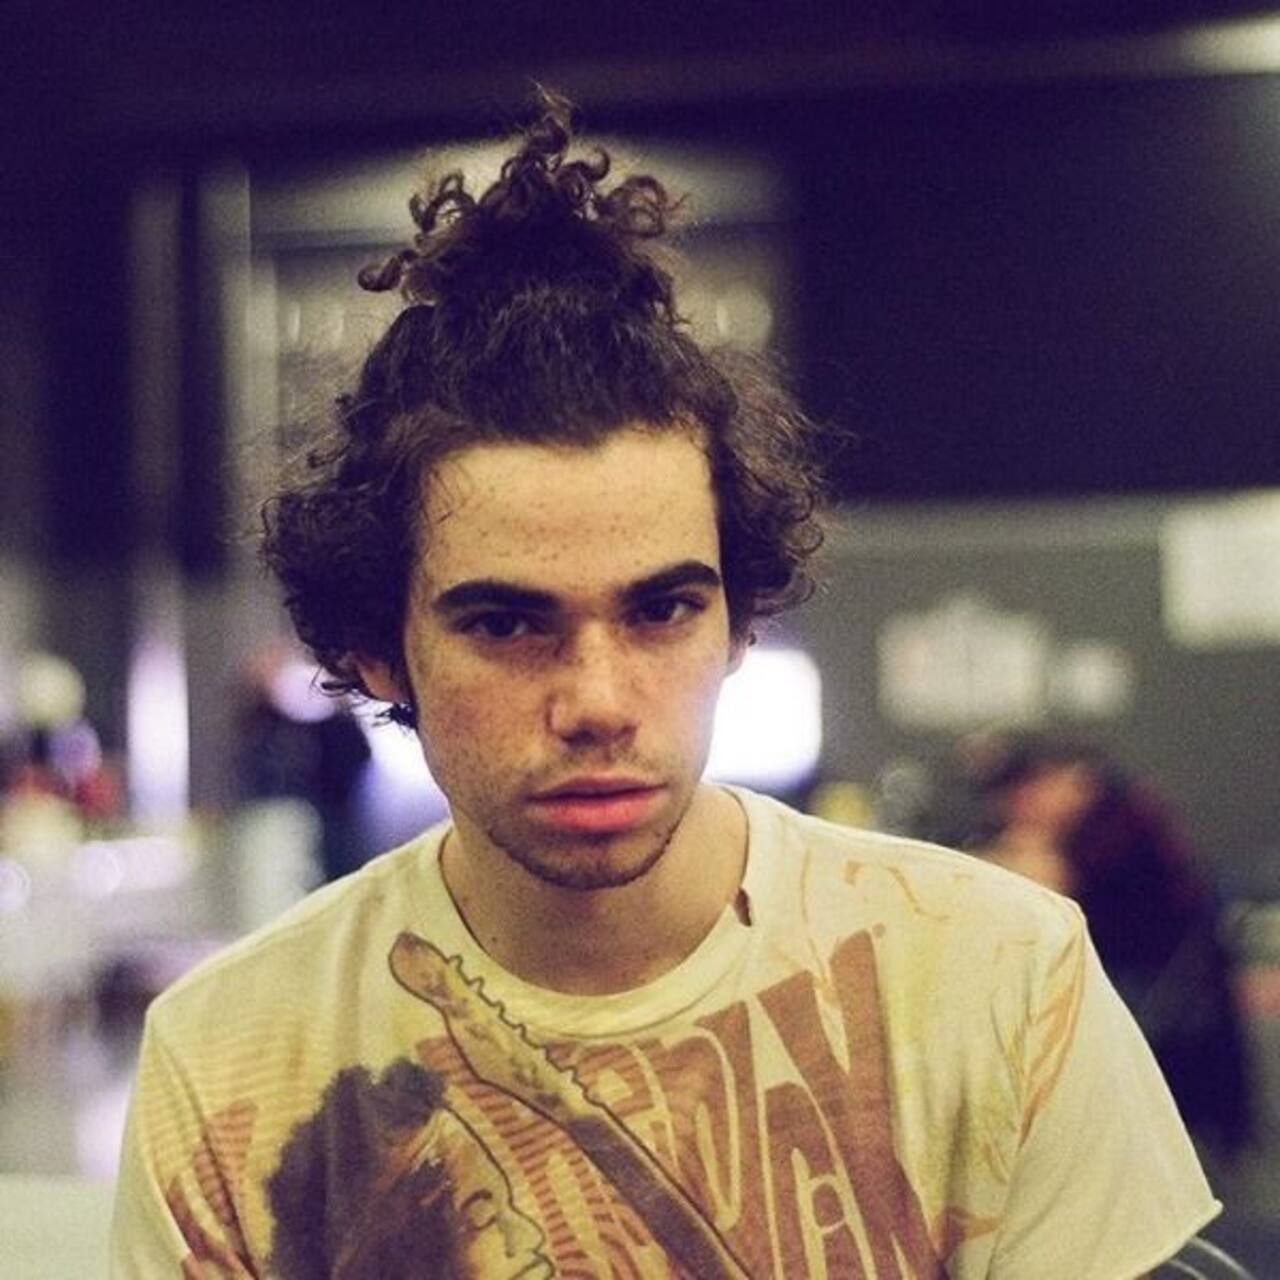 RIP Cameron Boyce: Adam Sandler and others mourn the sudden death of the actor